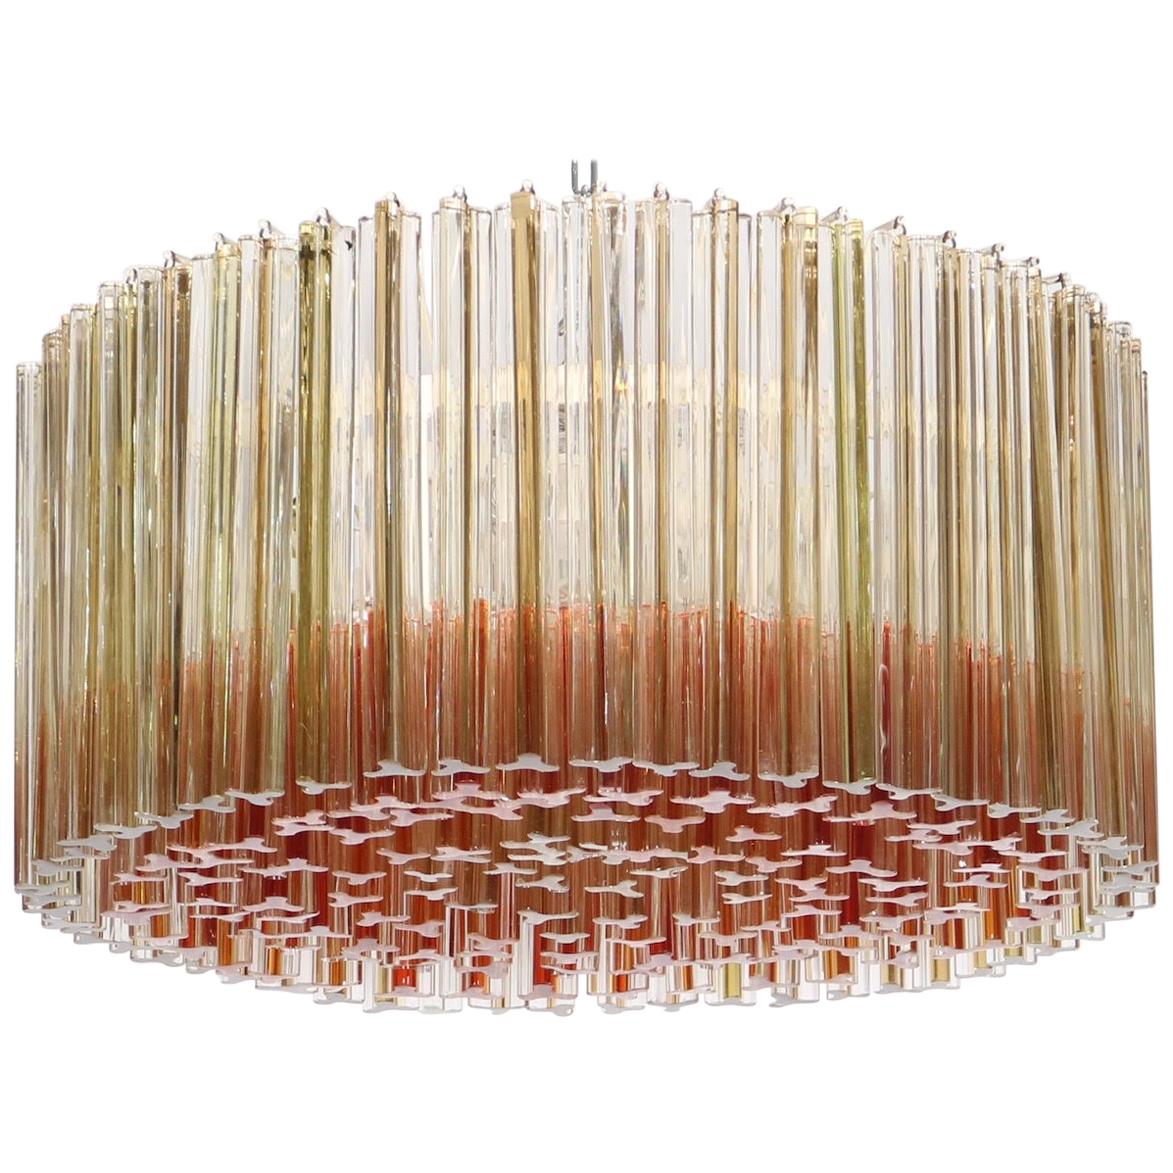 Hollywood Regency Venini Chandelier with Sommerso Trilobo Glass Rods